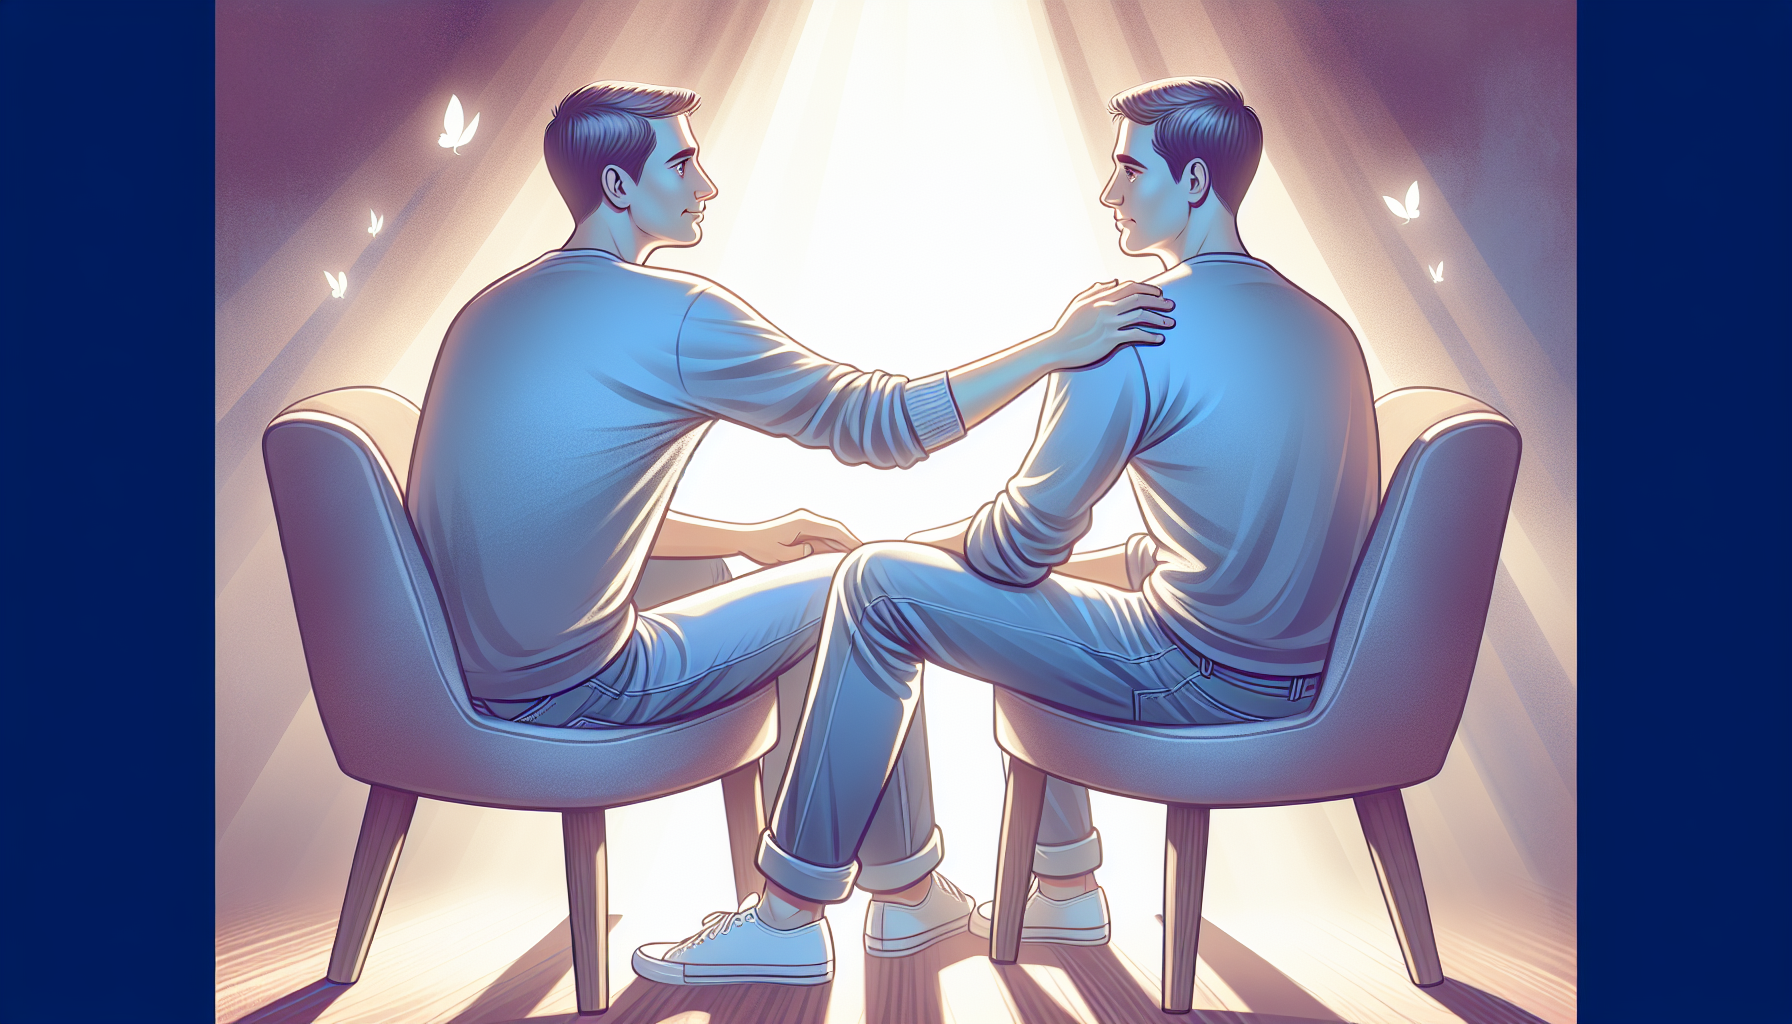 Illustration of a gay couple practicing self-compassion and positive self-talk